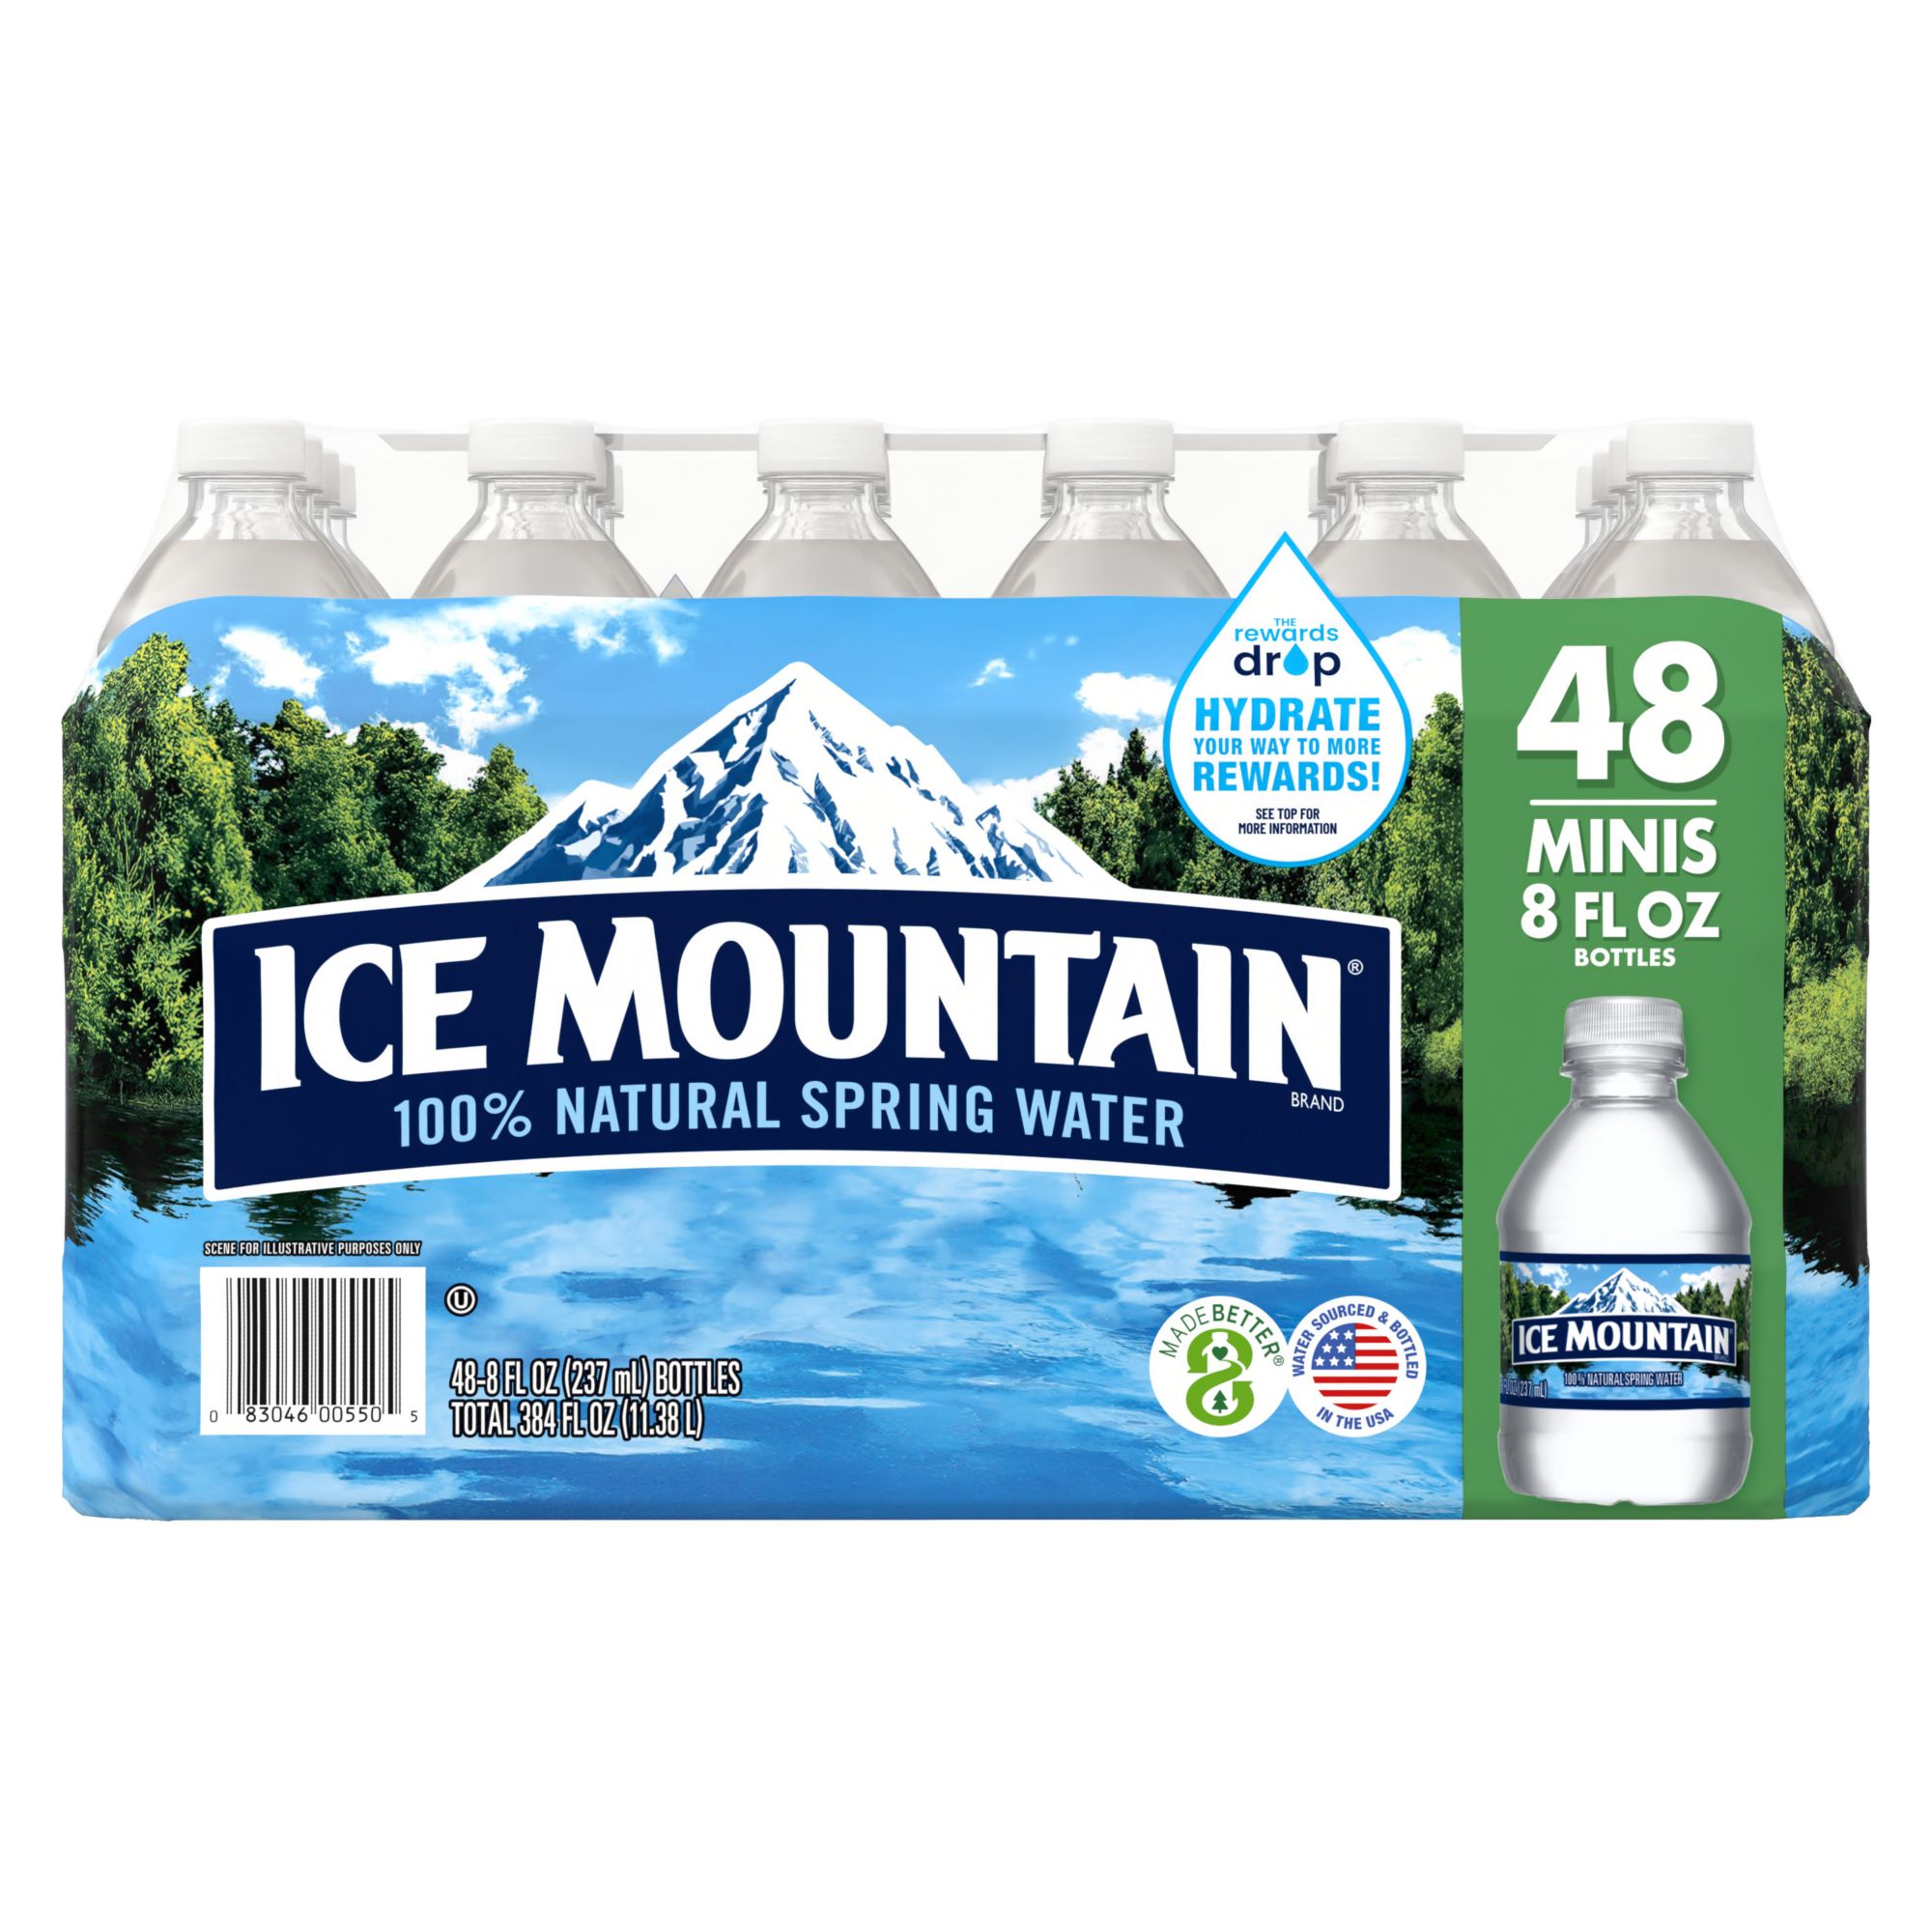 ICE MOUNTAIN 1L (15 PACK)